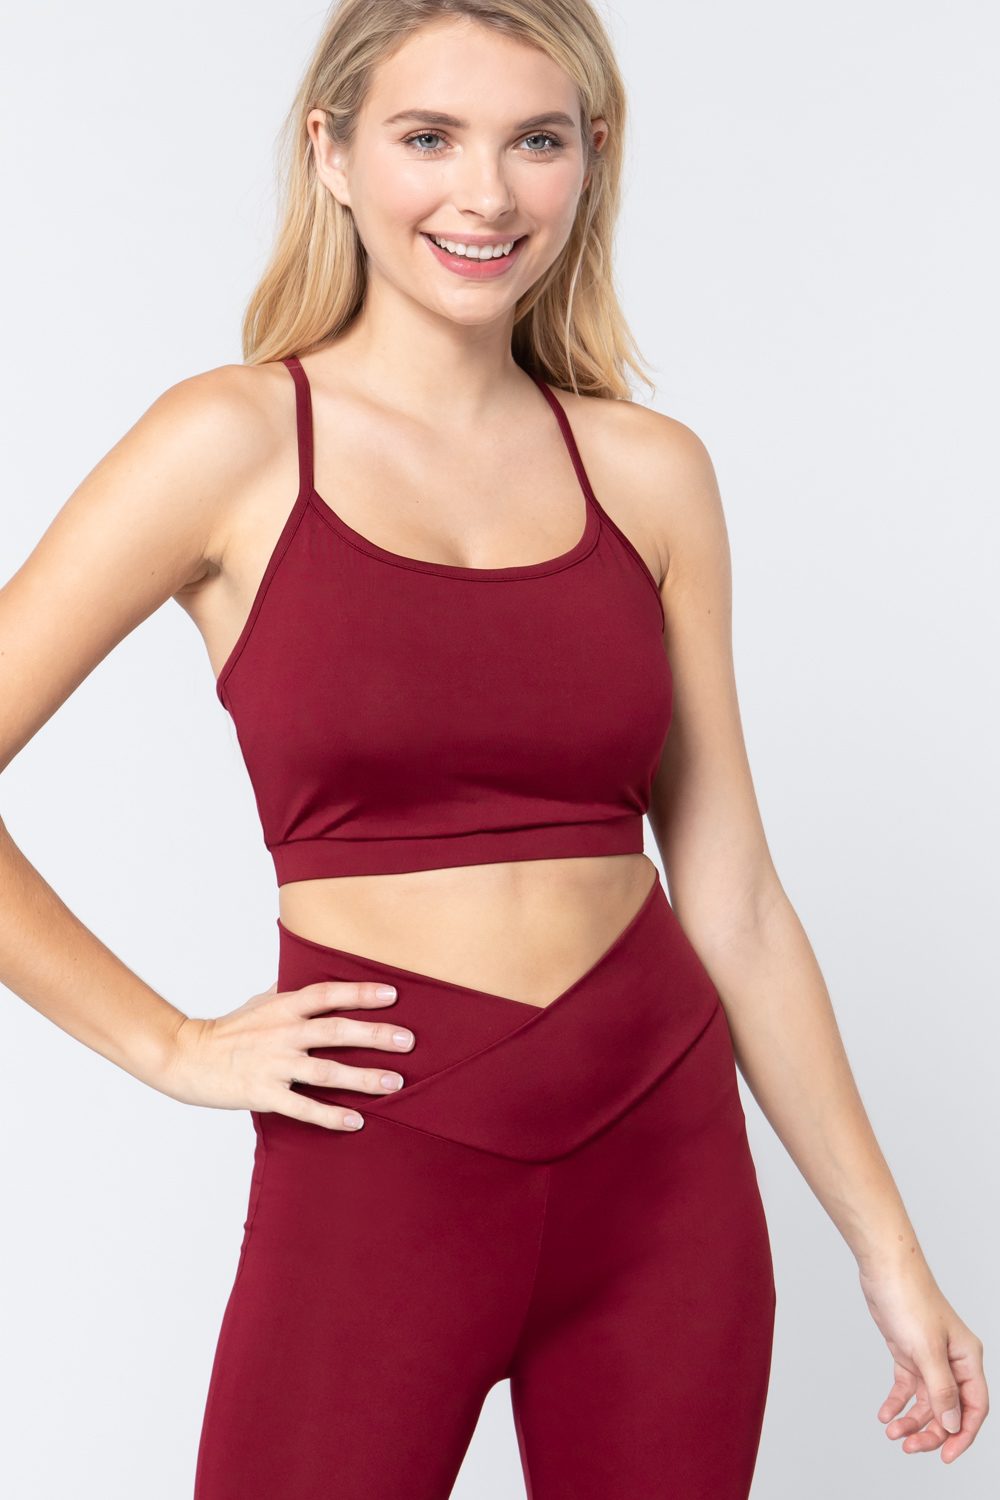 Workout Cami Bra Top - Love It Clothing